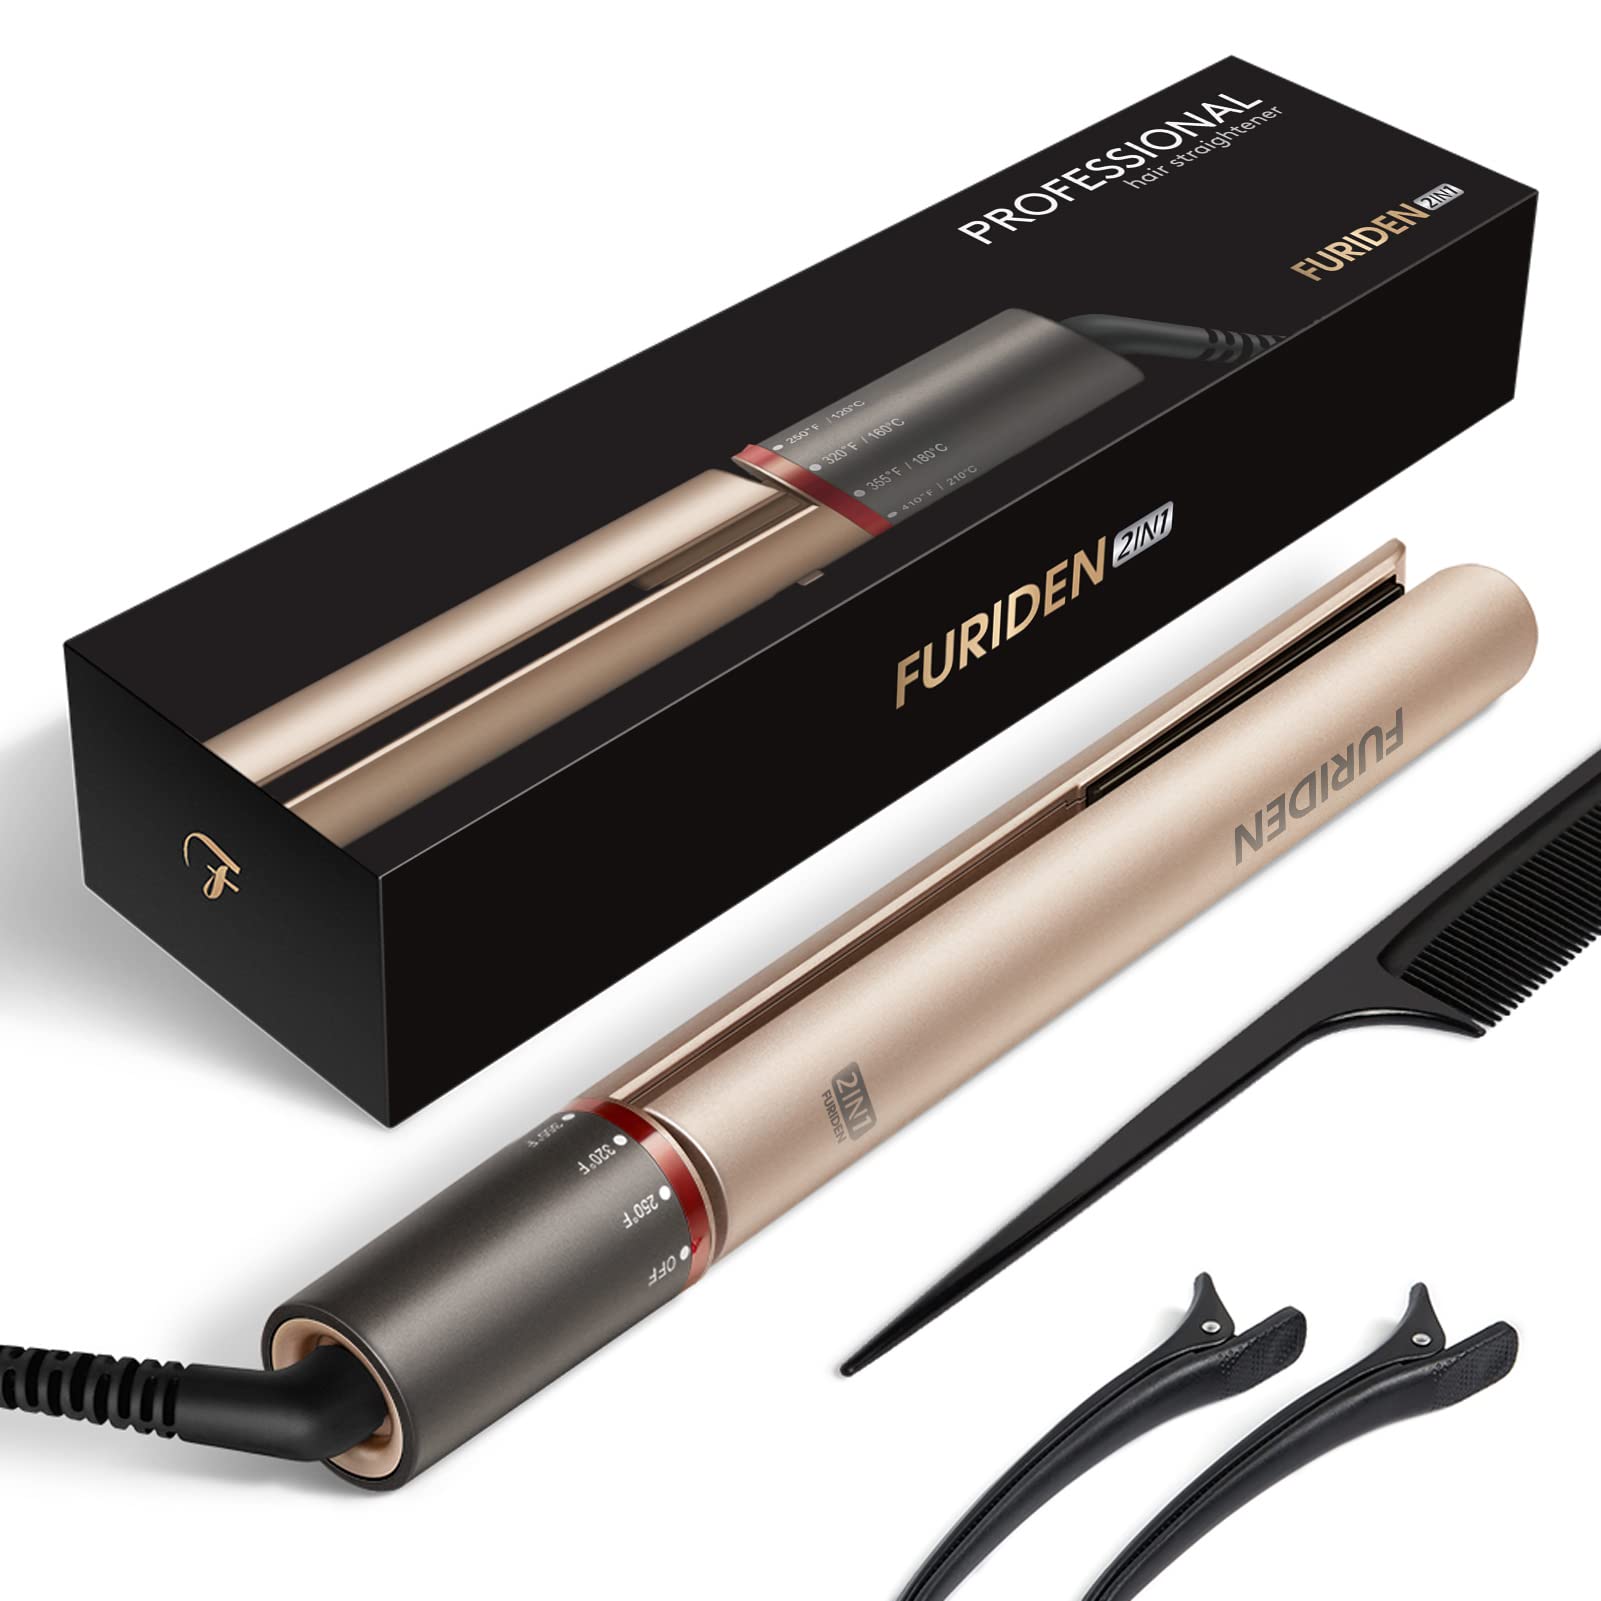 FURIDEN Professional Salon Quality Hair Straightener, Hair Straightener and Curler 2 in 1, Flat Iron Curling Iron in One, Fast R